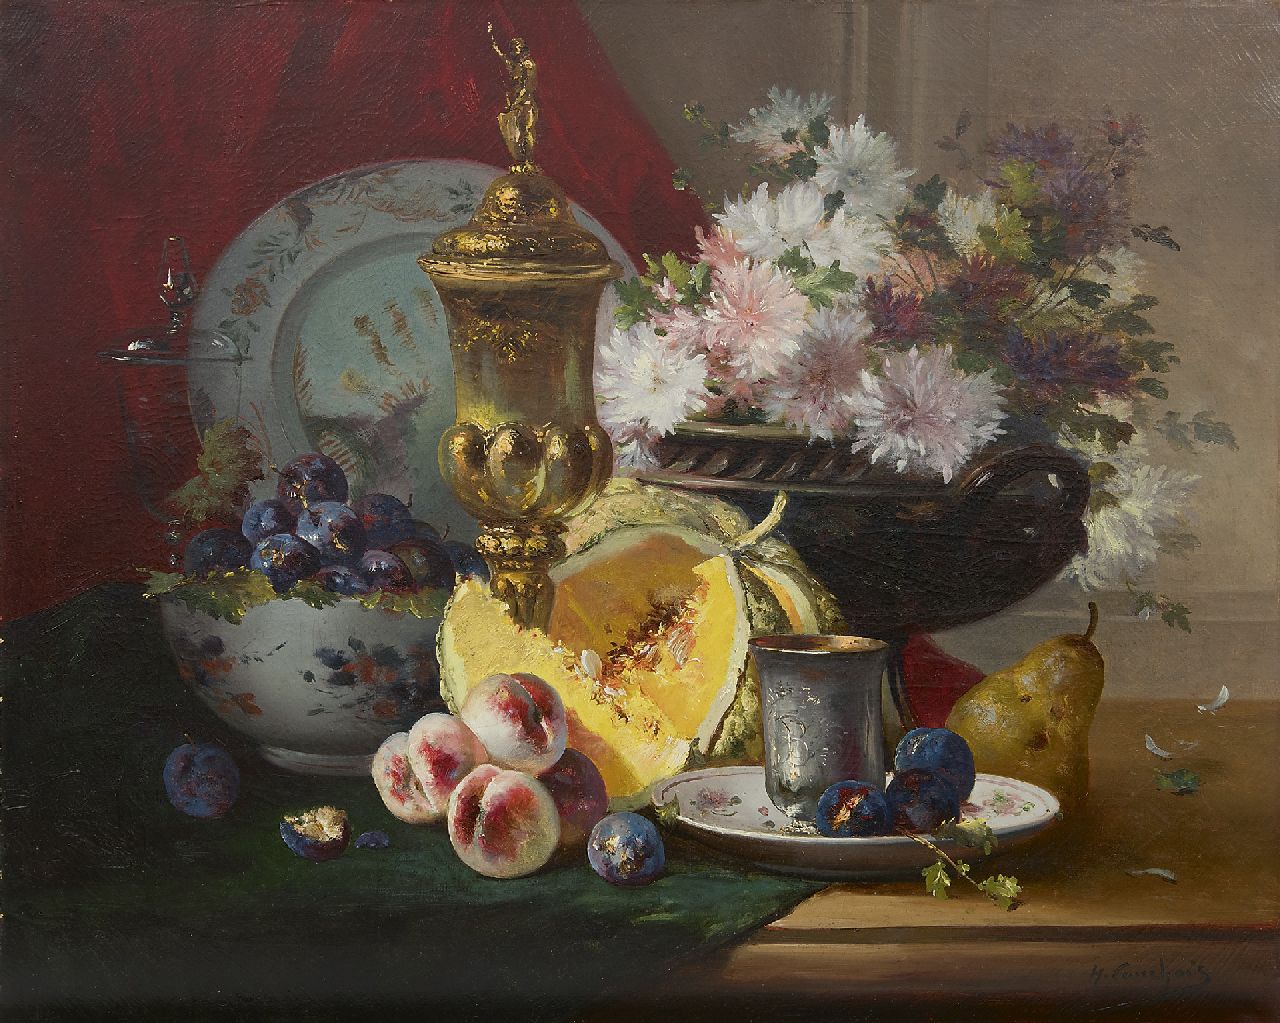 Cauchois E.H.  | Eugène-Henri Cauchois | Paintings offered for sale | A still life with crockery, flowers and fruit, oil on canvas 63.4 x 77.3 cm, signed l.r.